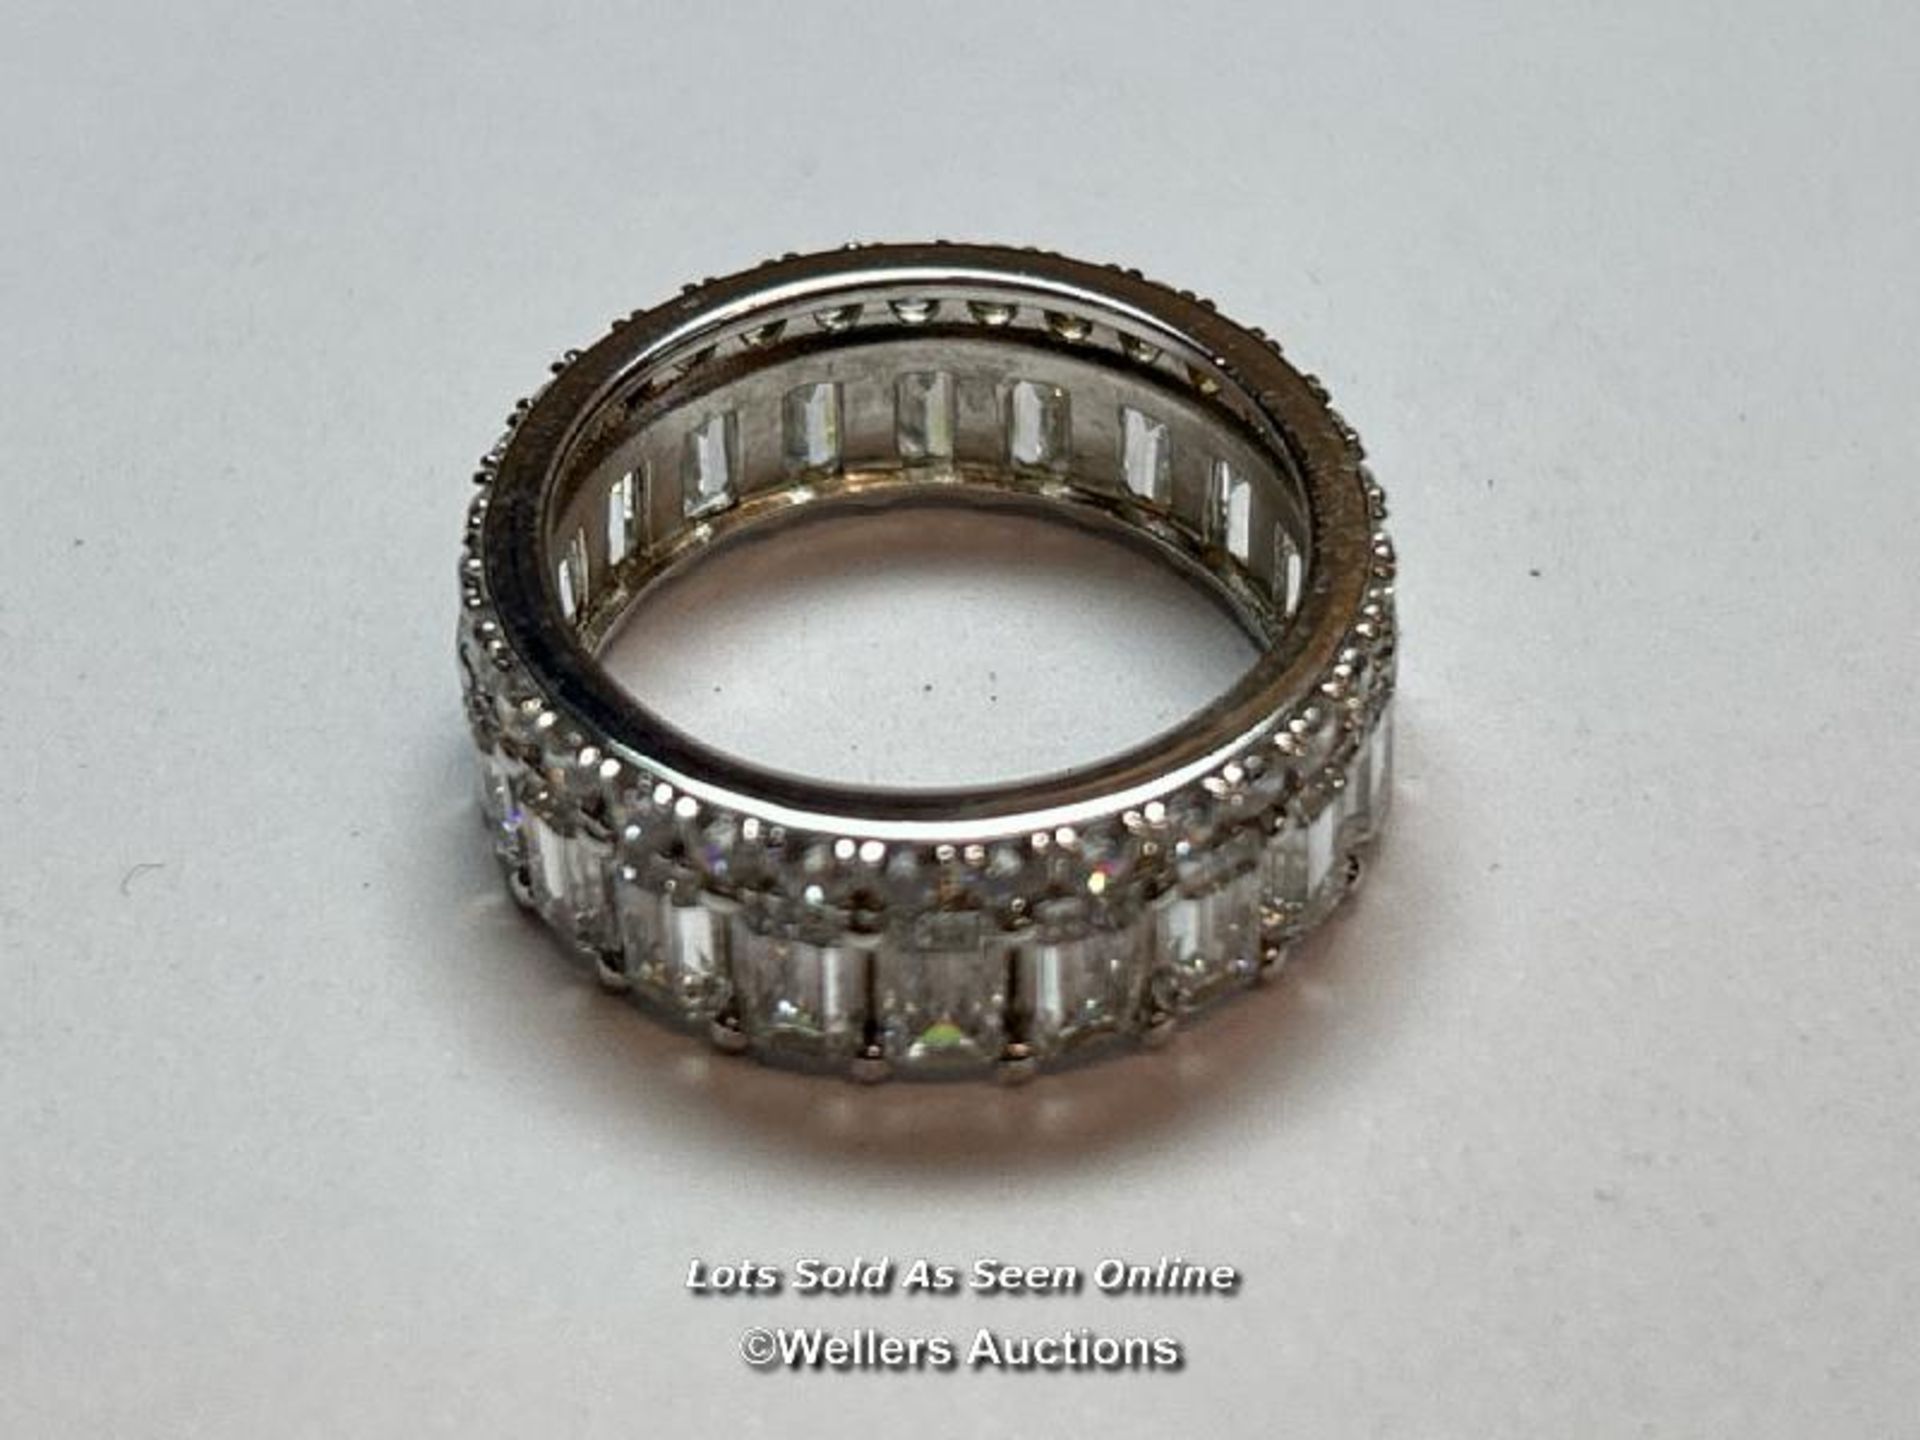 A hallmarked 9ct rose gold ring by QVC with pierced floral design band and set with two rows of - Image 5 of 5